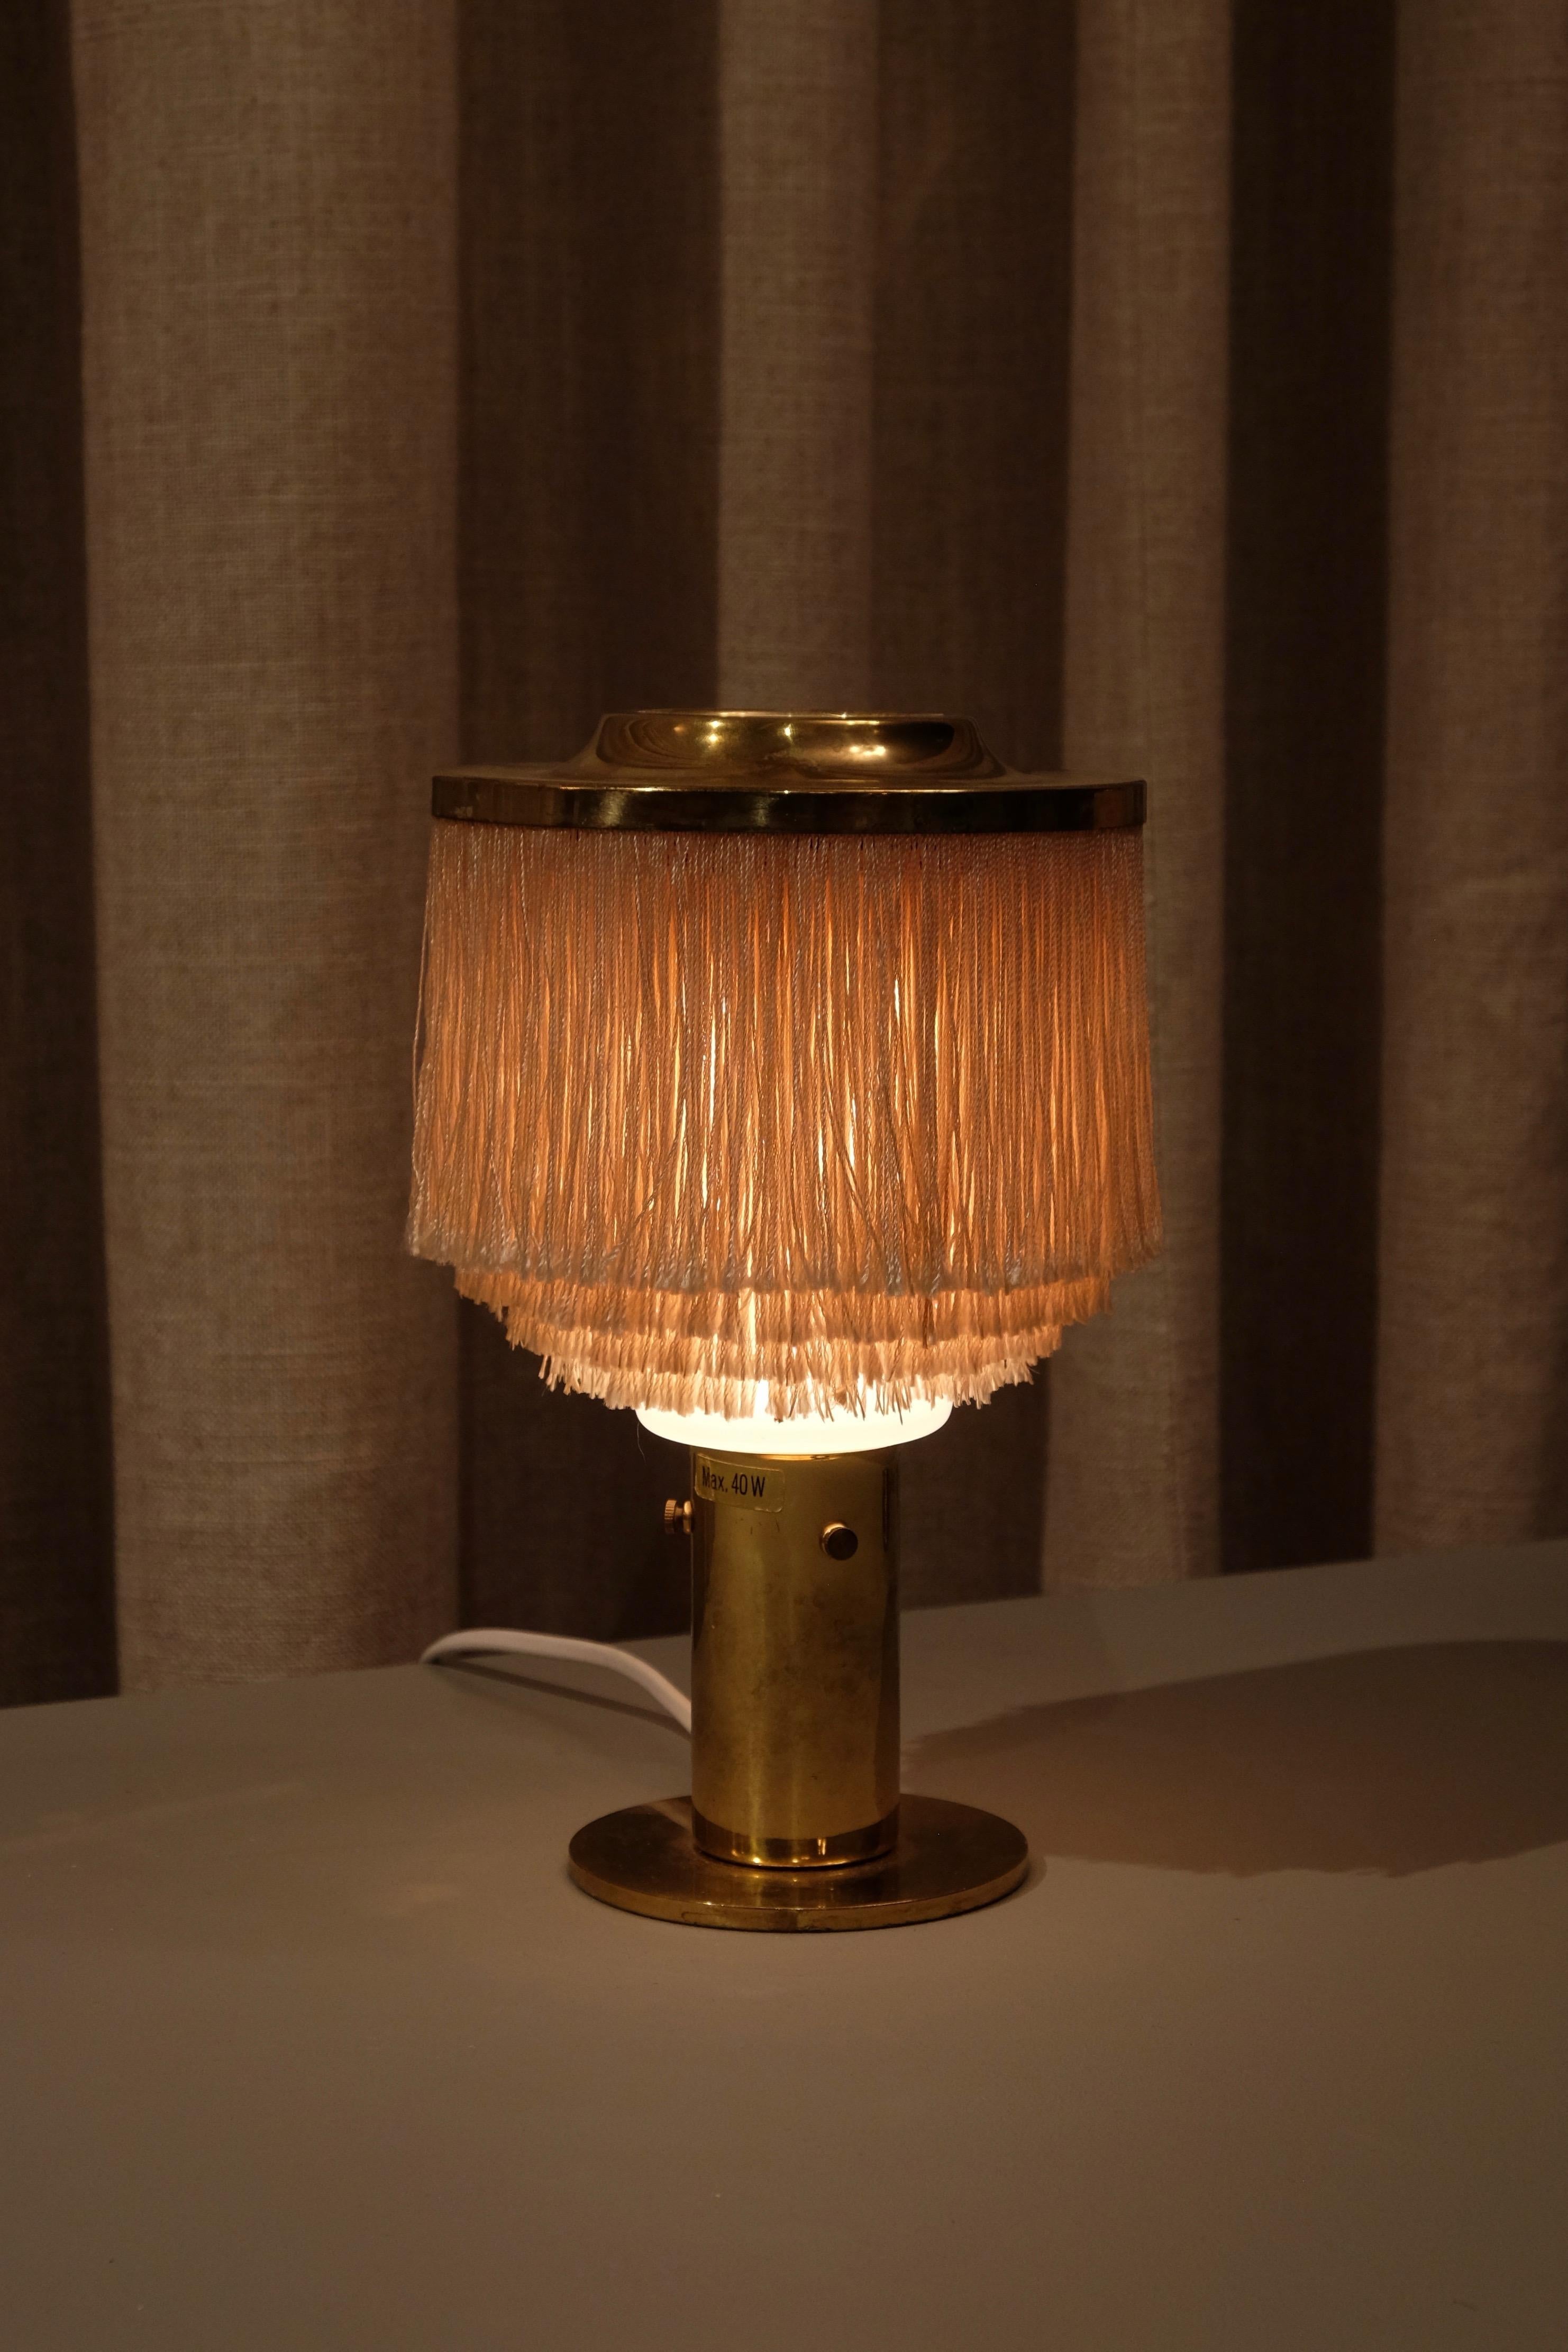 Pair of Hans-Agne Jakobsson Table Lamps Model B-145, 1960s (Messing)